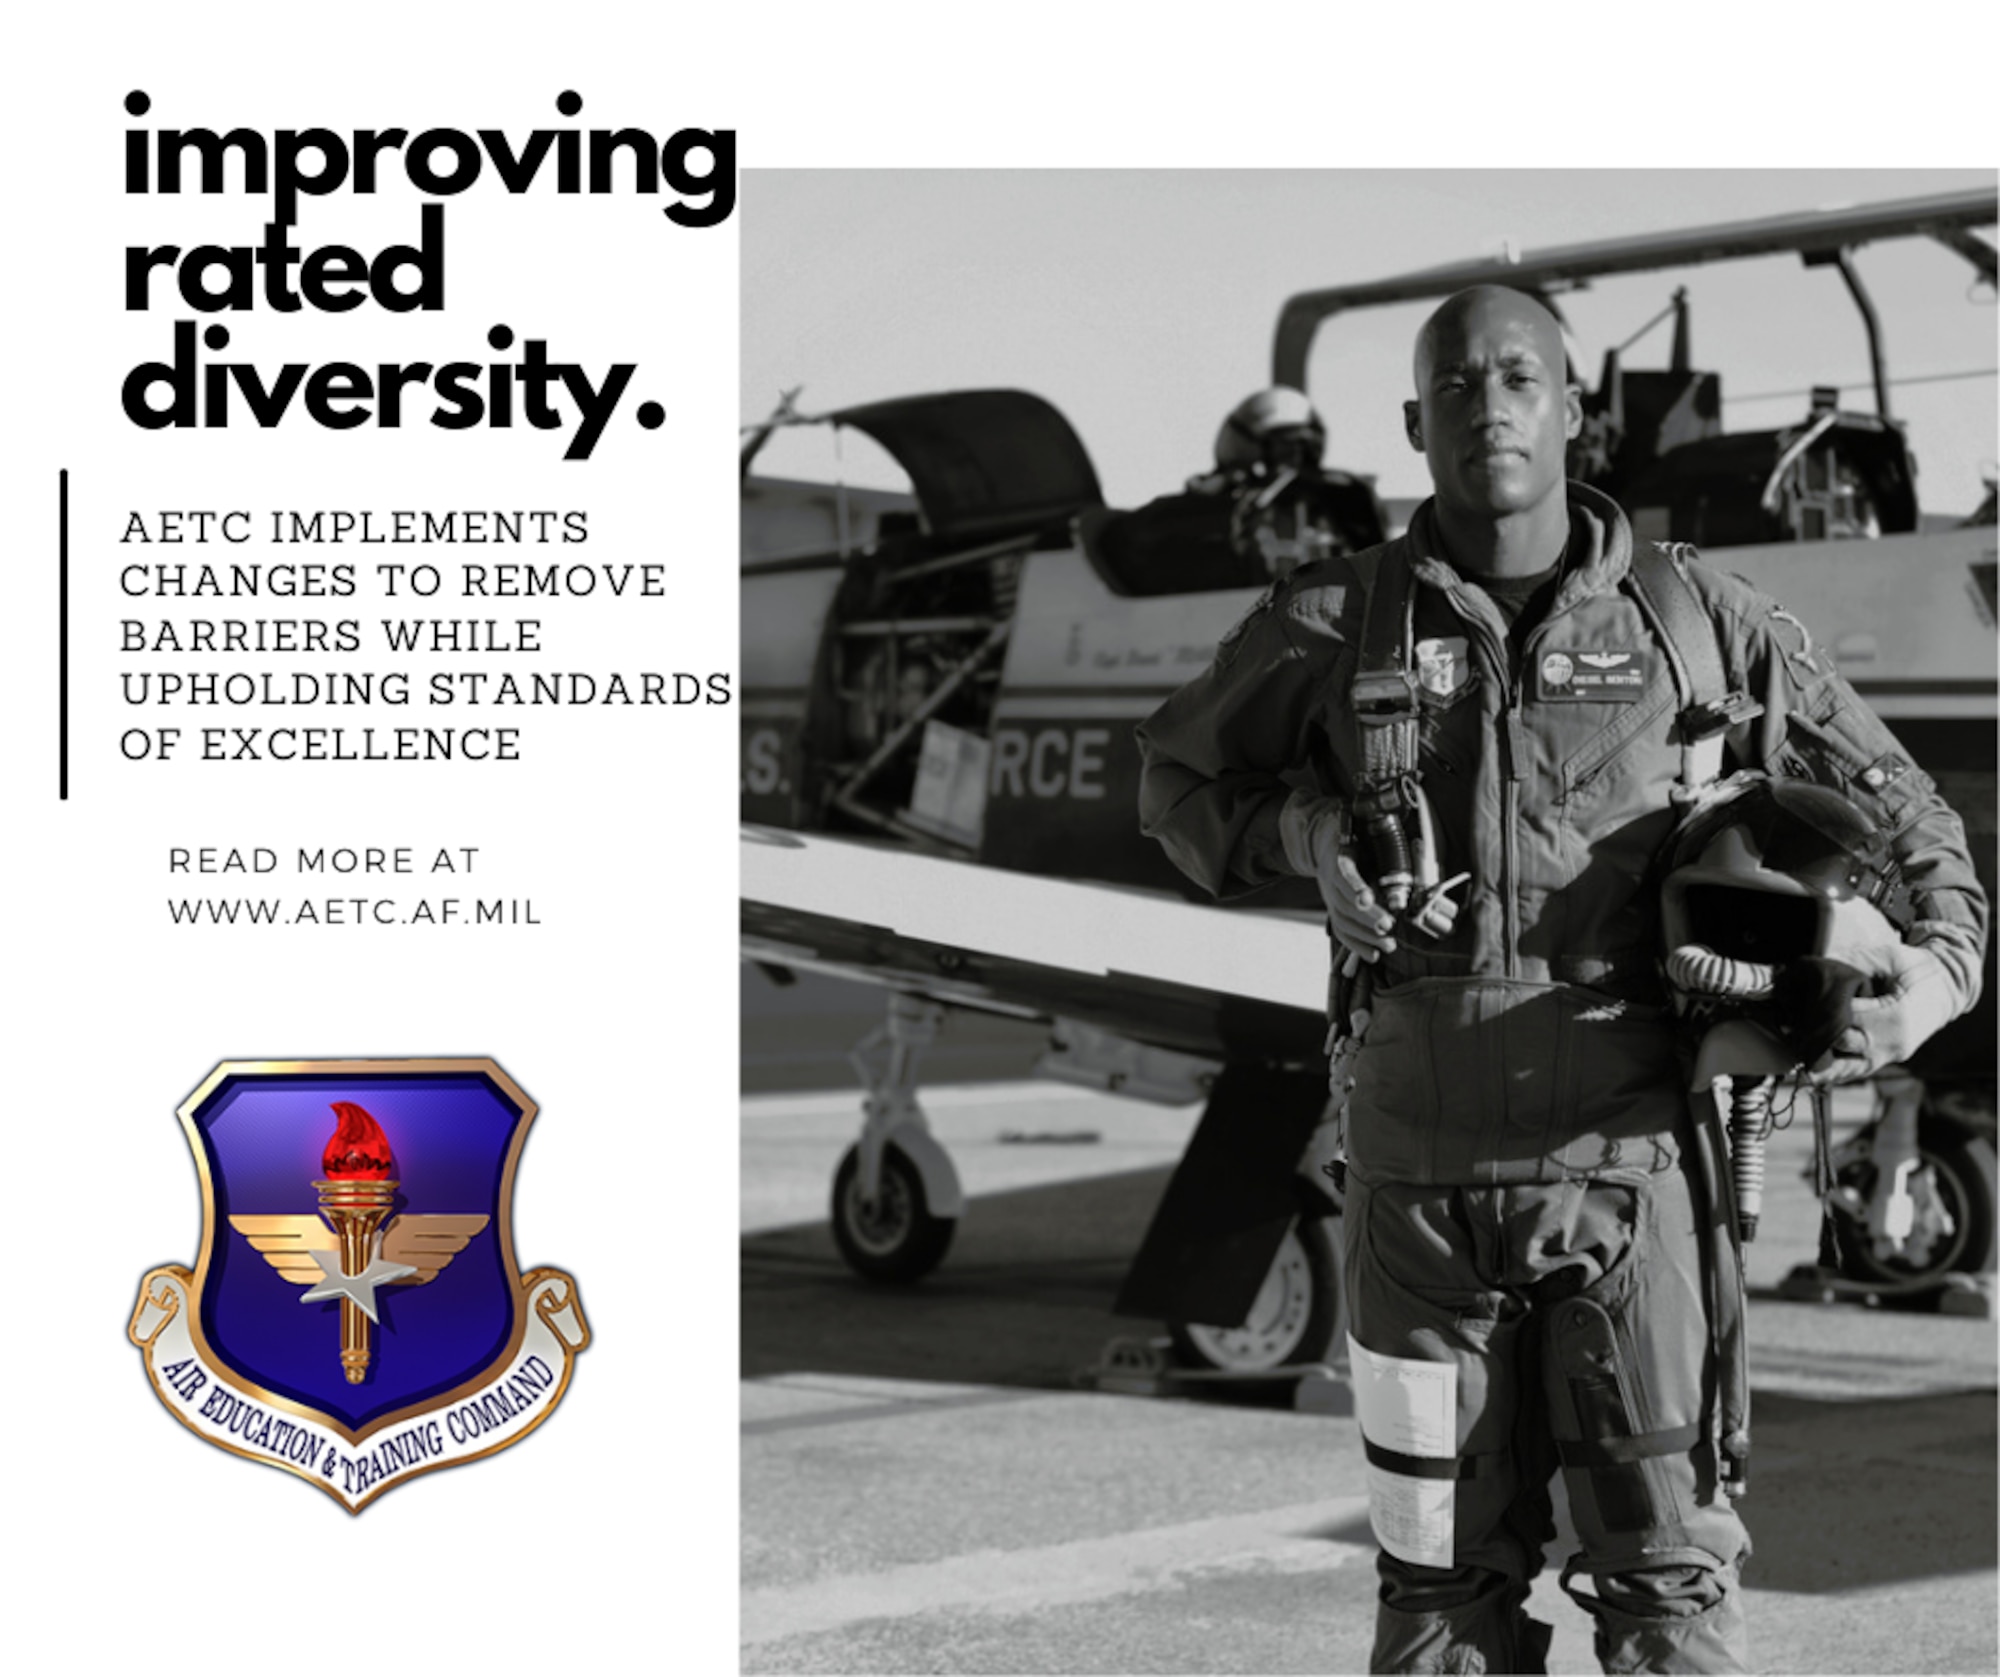 Several AETC initiatives to remove barriers for qualified candidates in the pilot candidate selection process were highlighted in the Air Force’s six-month assessment of its initial Racial Disparity Report, Sept. 9, 2021.